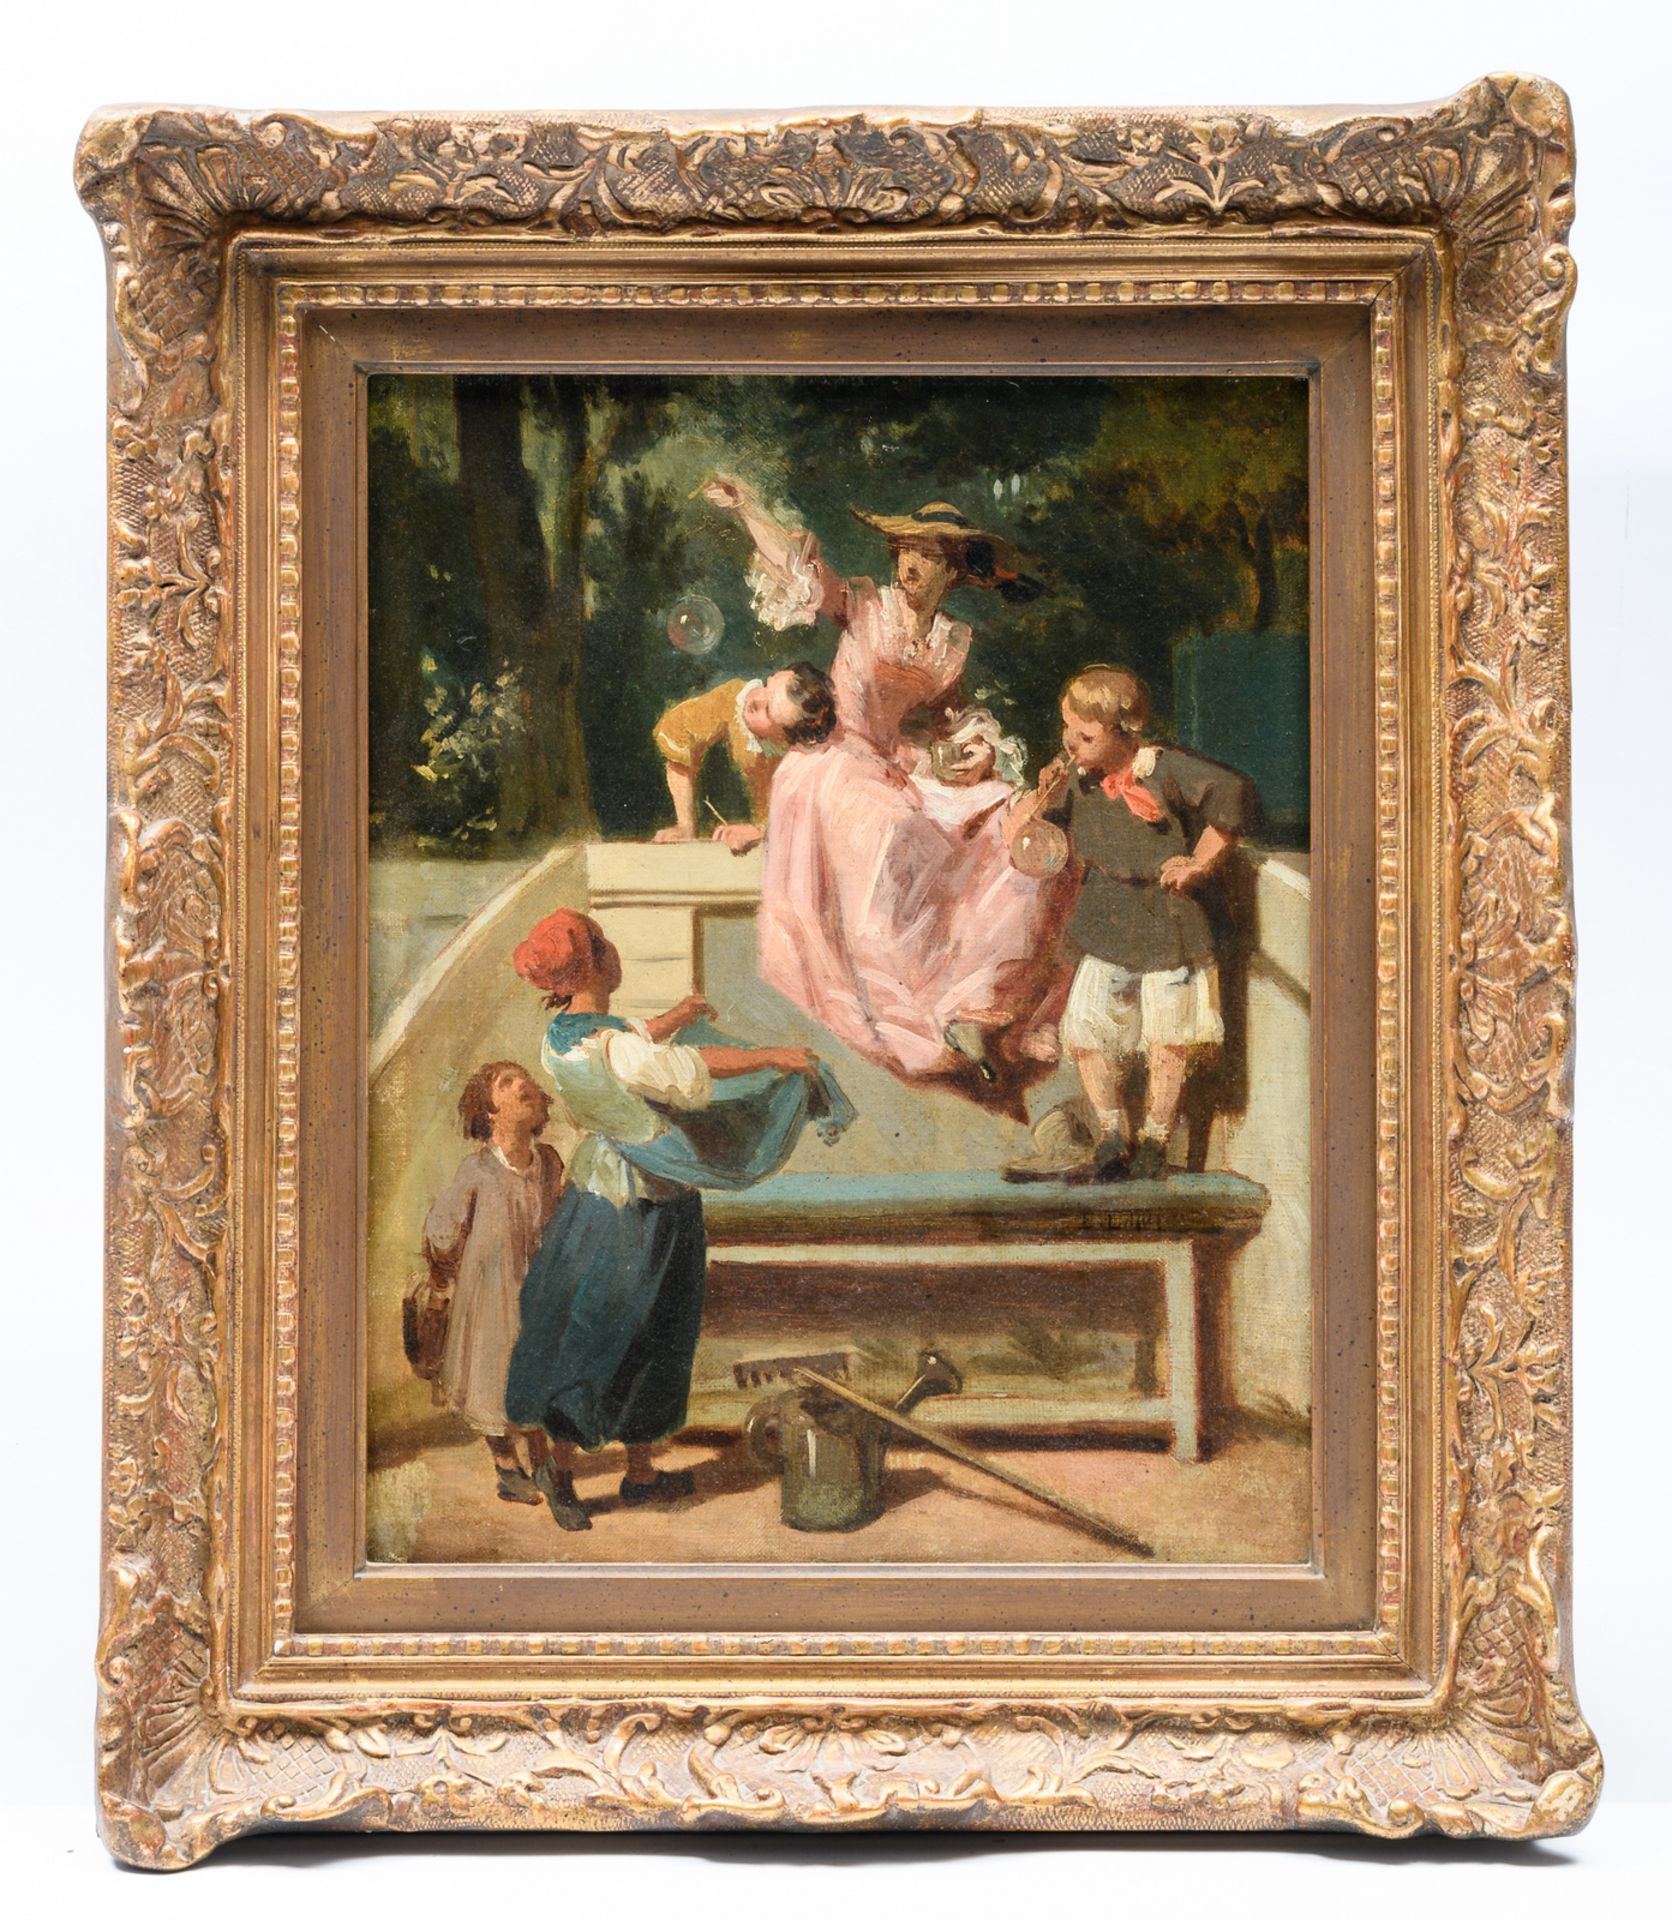 (Lami E.), blowing bubbles, oil on canvas, late 19th - early 20thC, 32 x 41 cm - Image 2 of 4